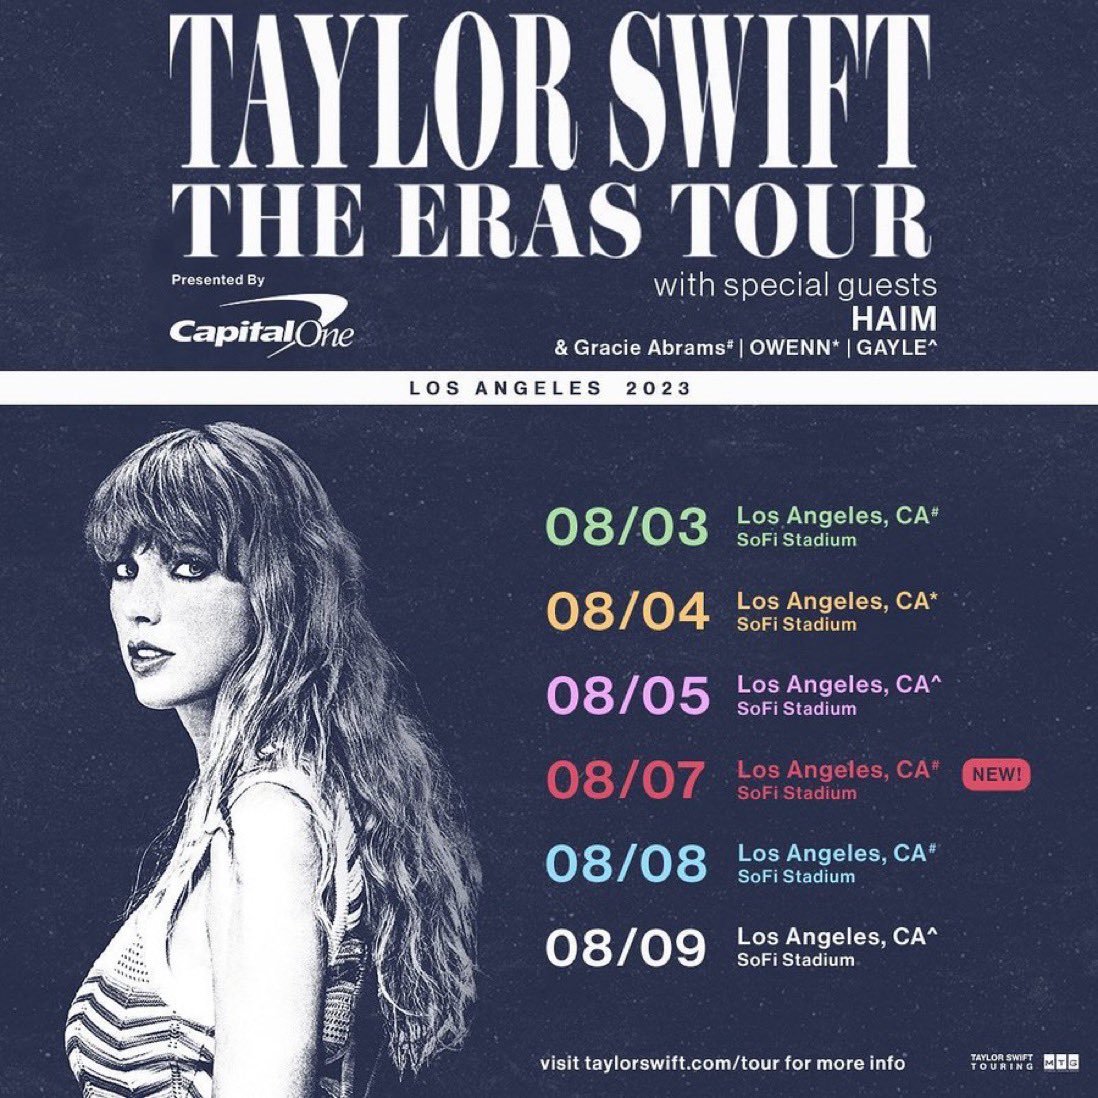 A new show has been added in Los Angeles on August 7th! 🇺🇸 #TSTheErasTour